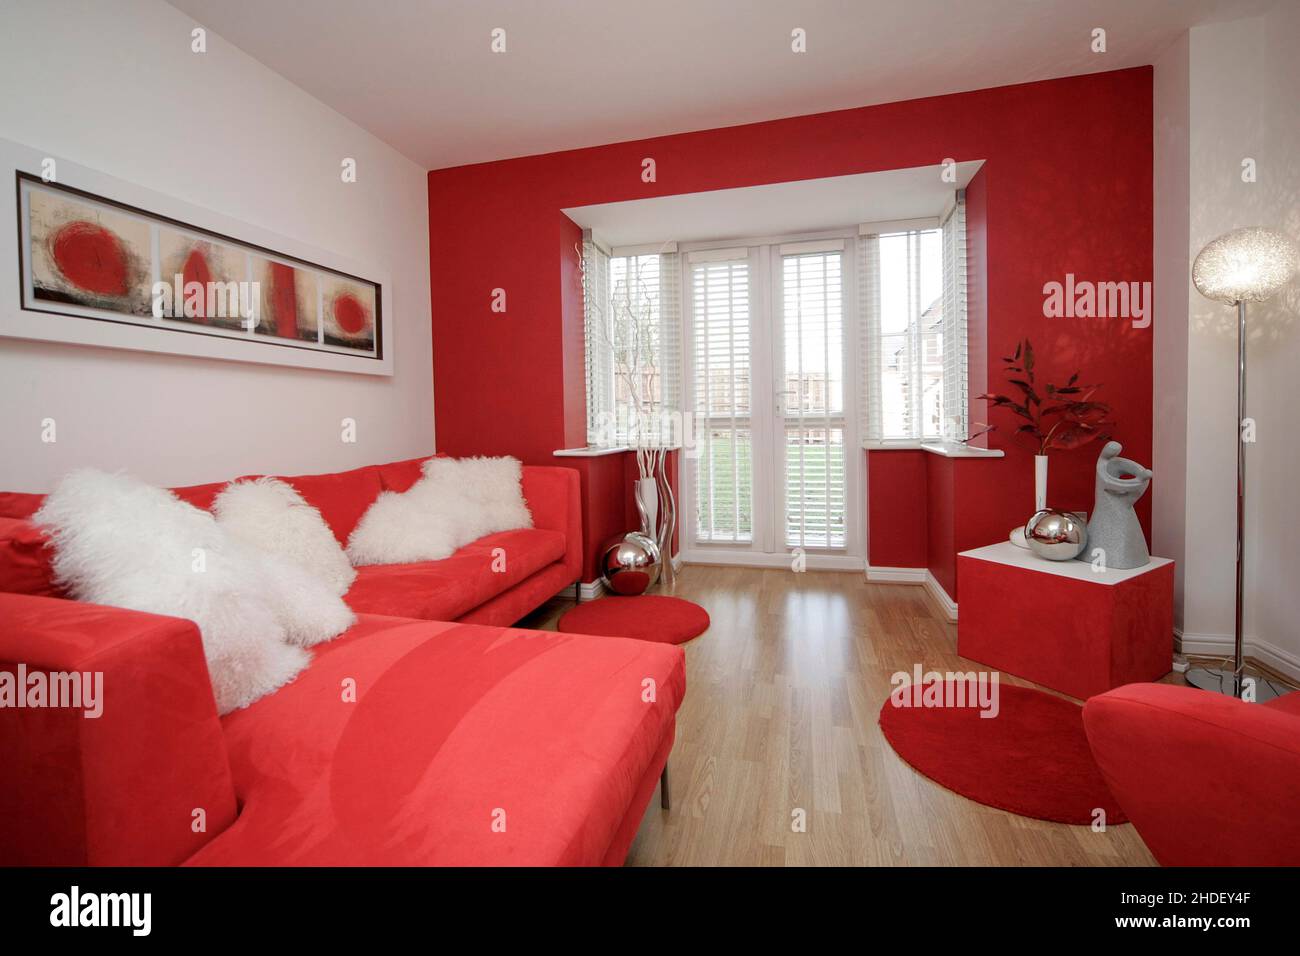 Modern lounge withwood effect laminate floor and corner sofa, chair,  furniture in scarlet red. Red decor. French doors. Stock Photo